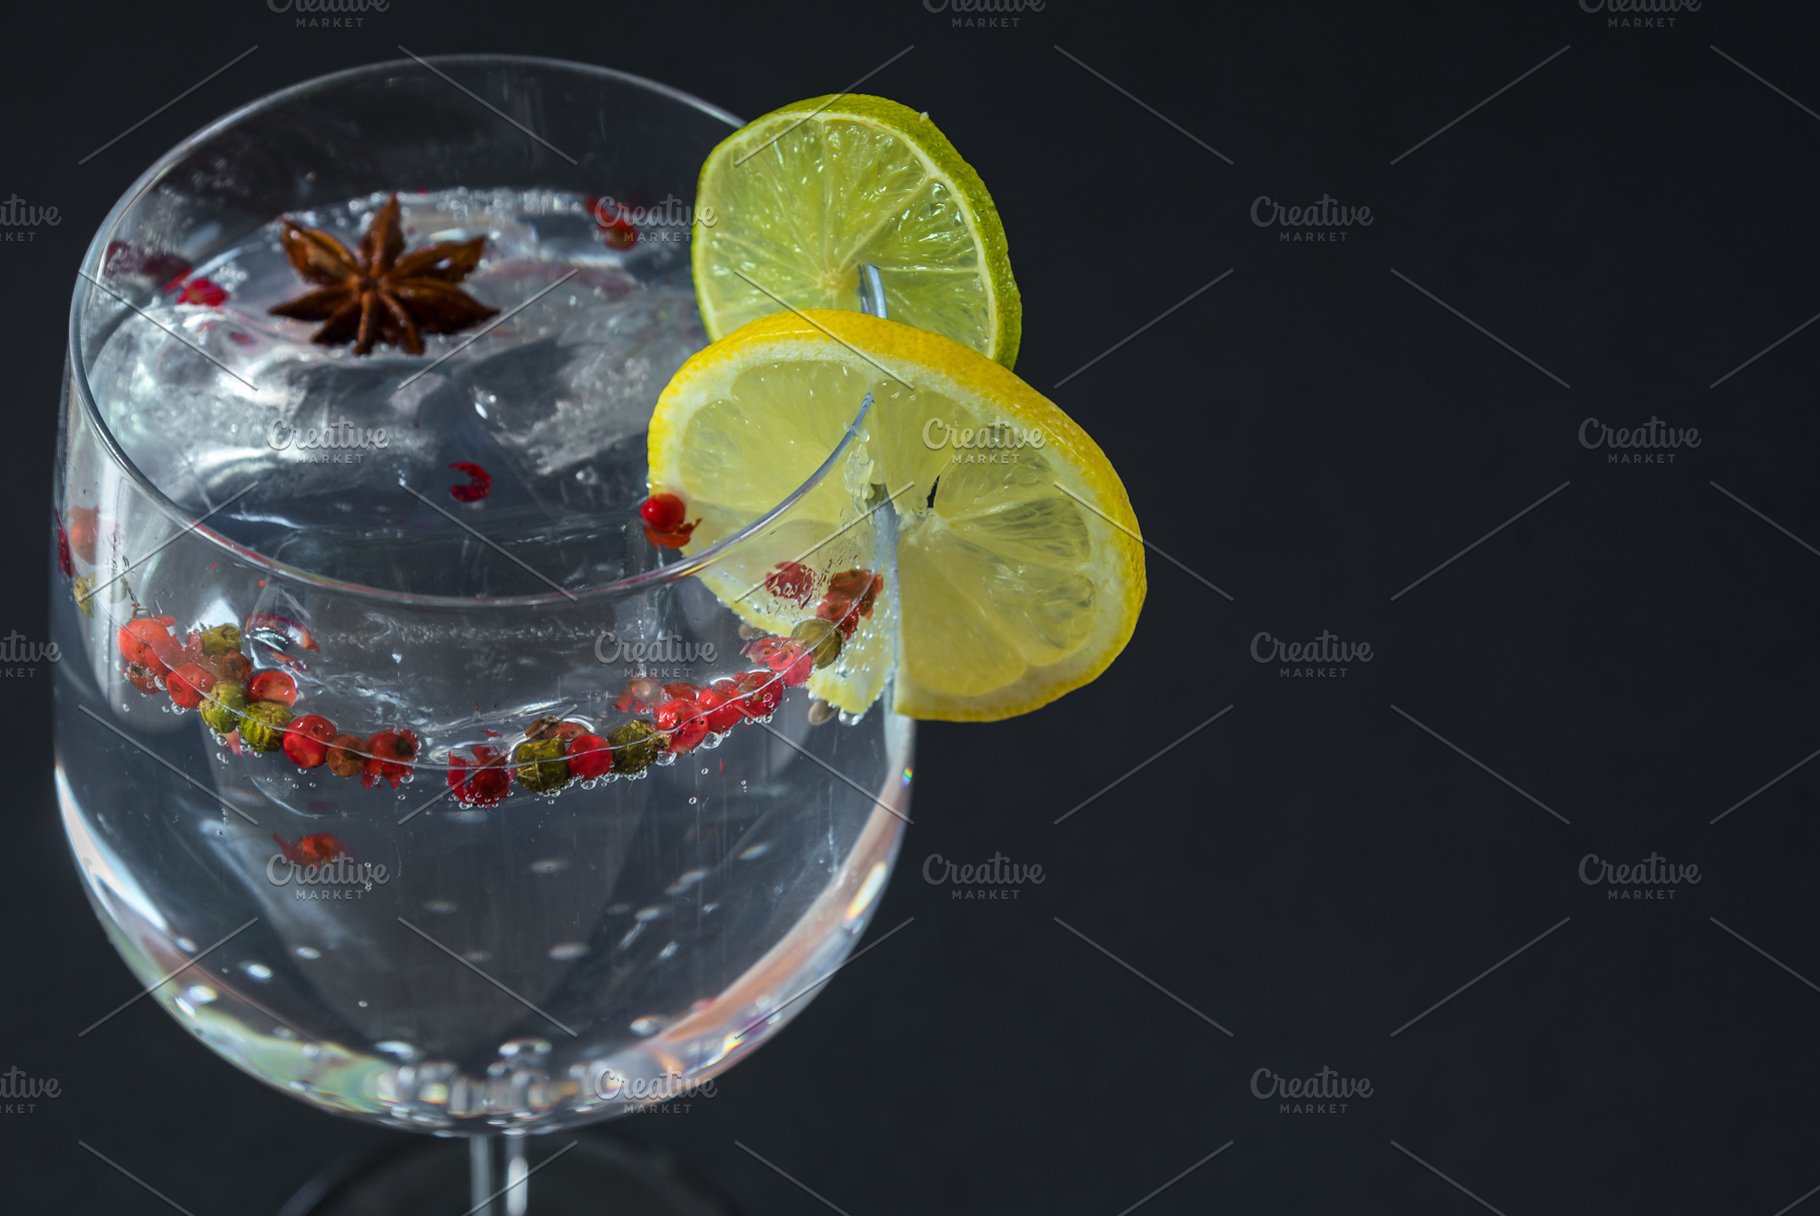 Gin Tonic On A Black Background High Quality Food Image